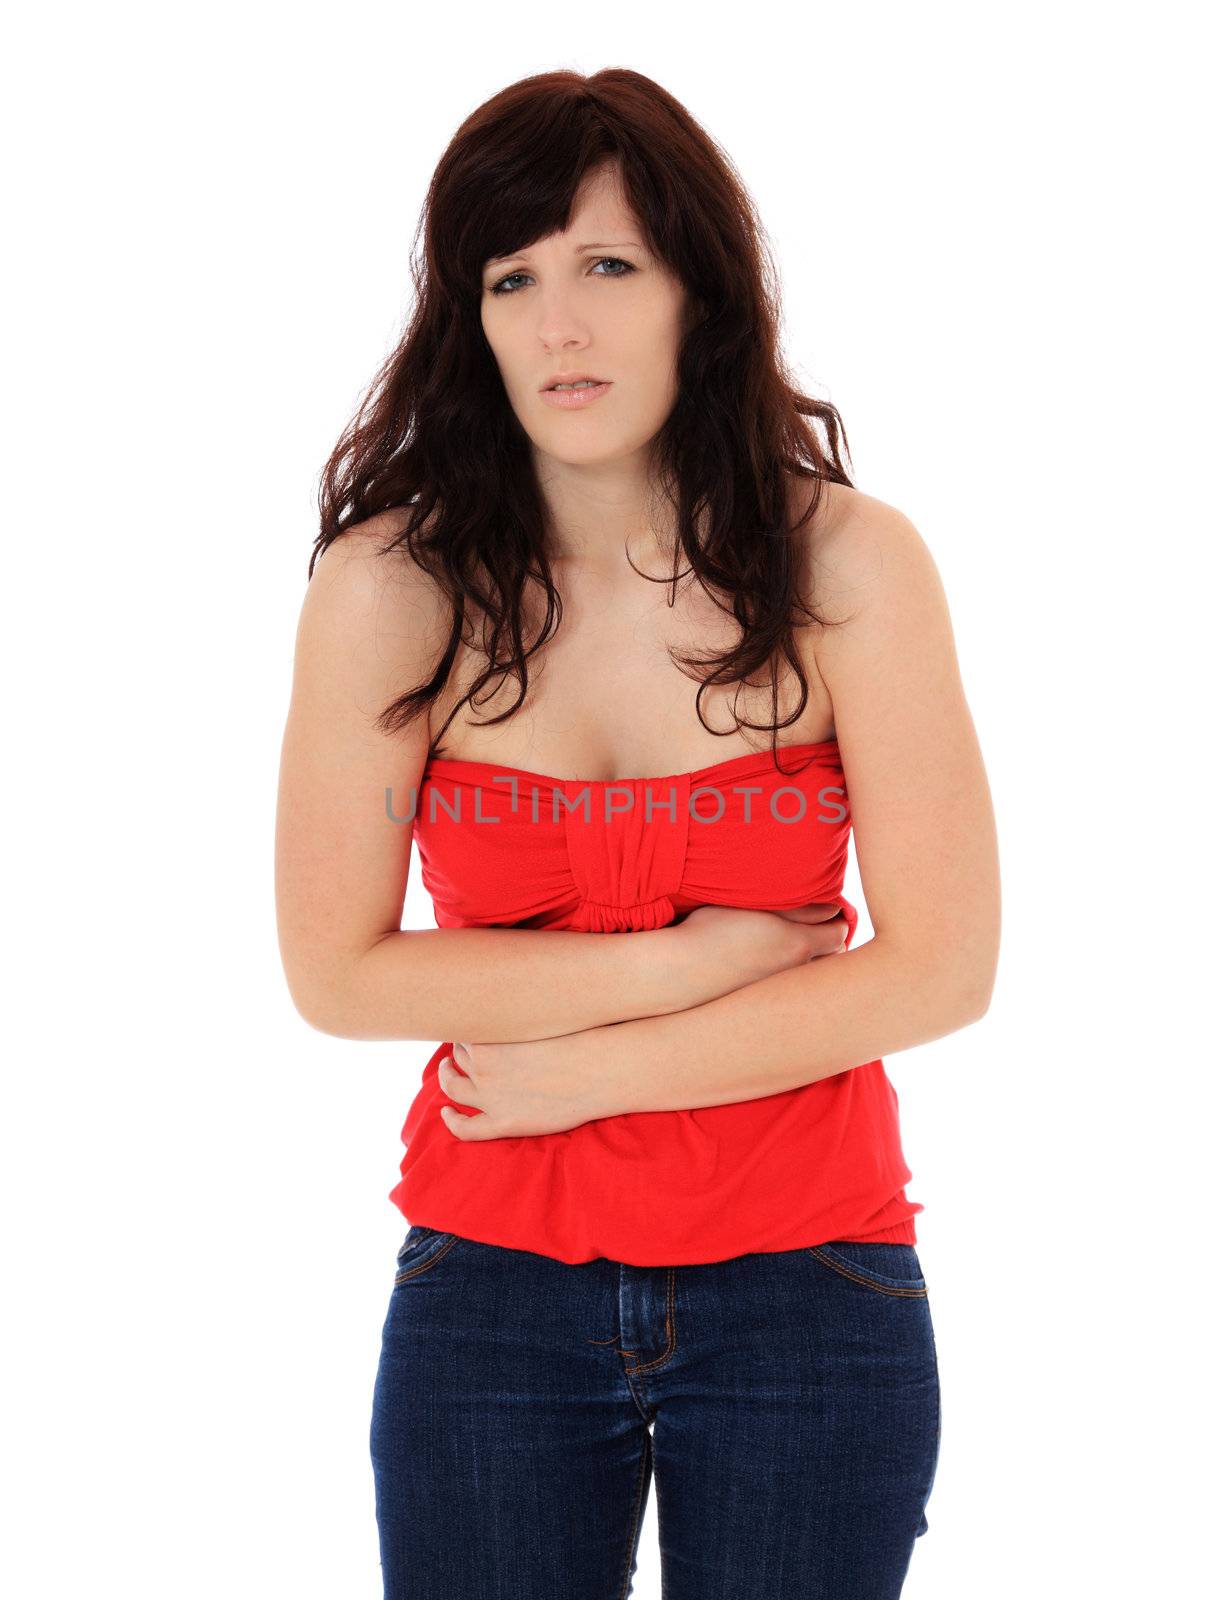 Attractive young woman suffering from stomachache. All on white background.